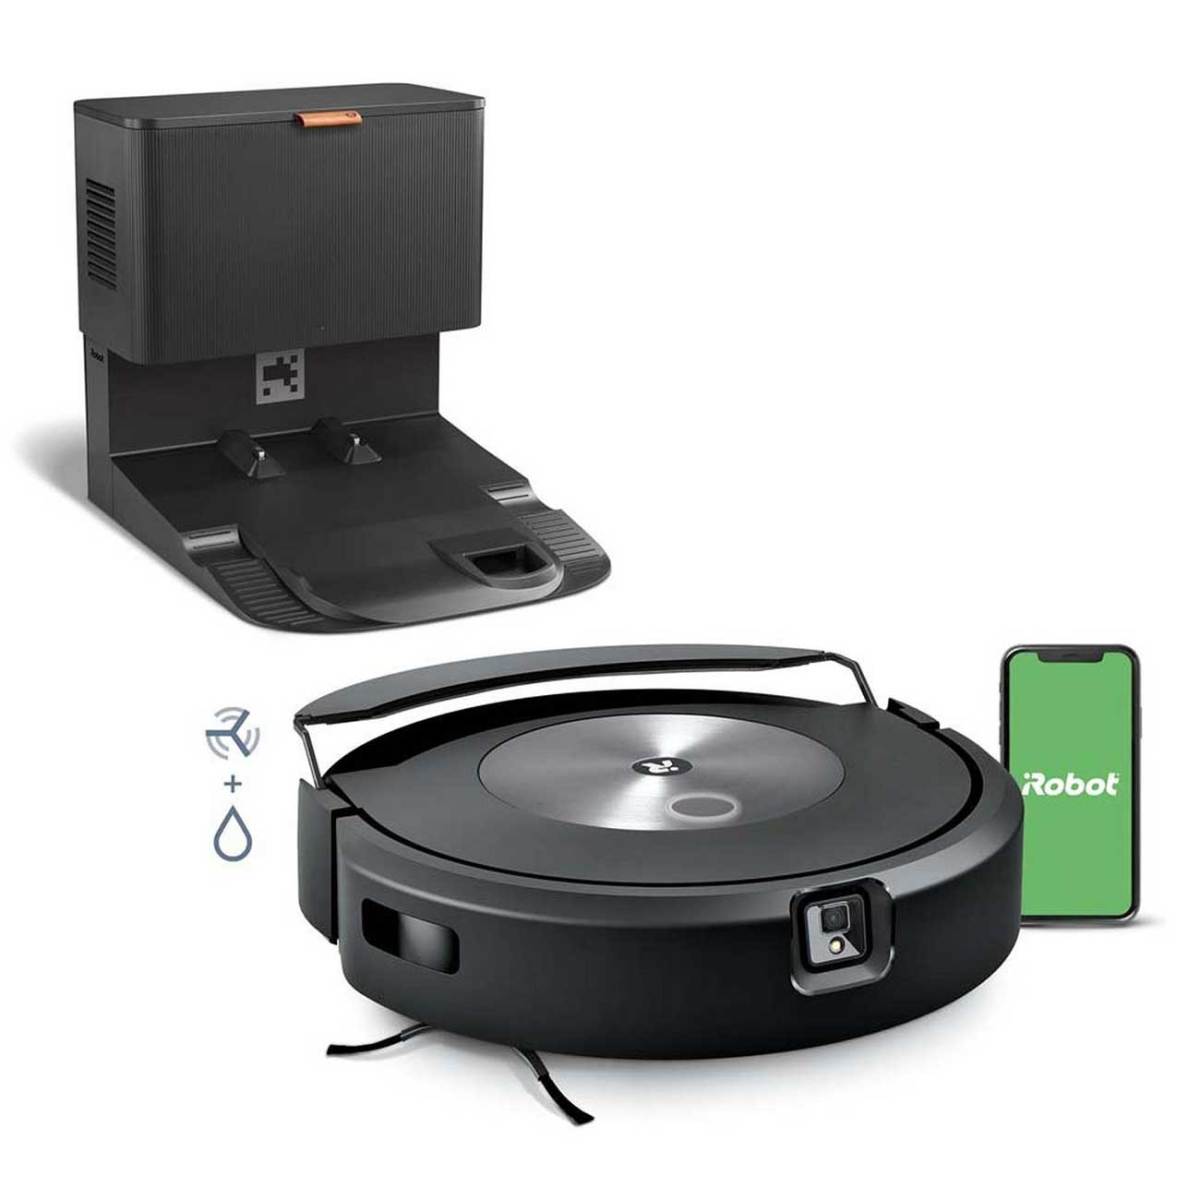 roomba combo j7+ out of its dock